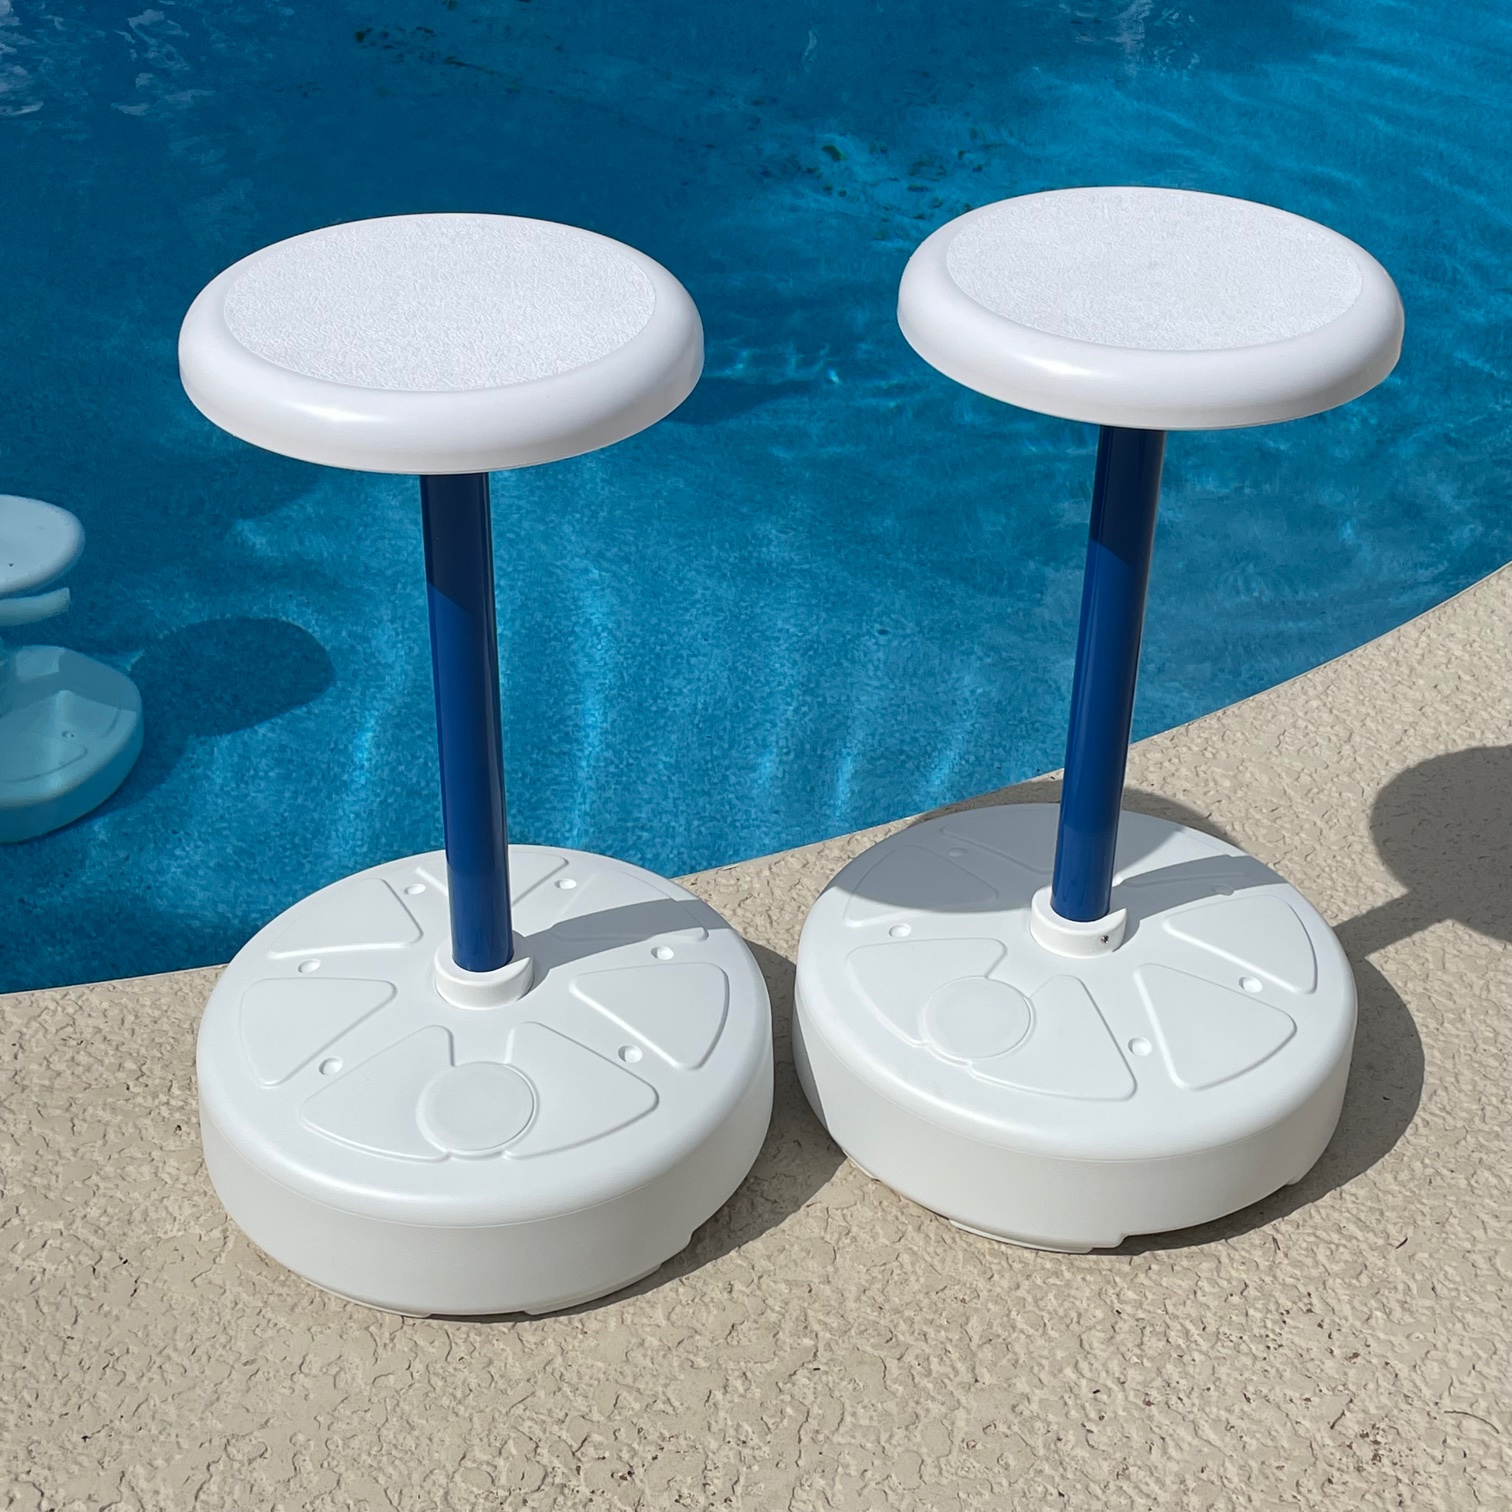 Relaxation Station Swimming Pool Stools, Pool Bar Stool Dimensions